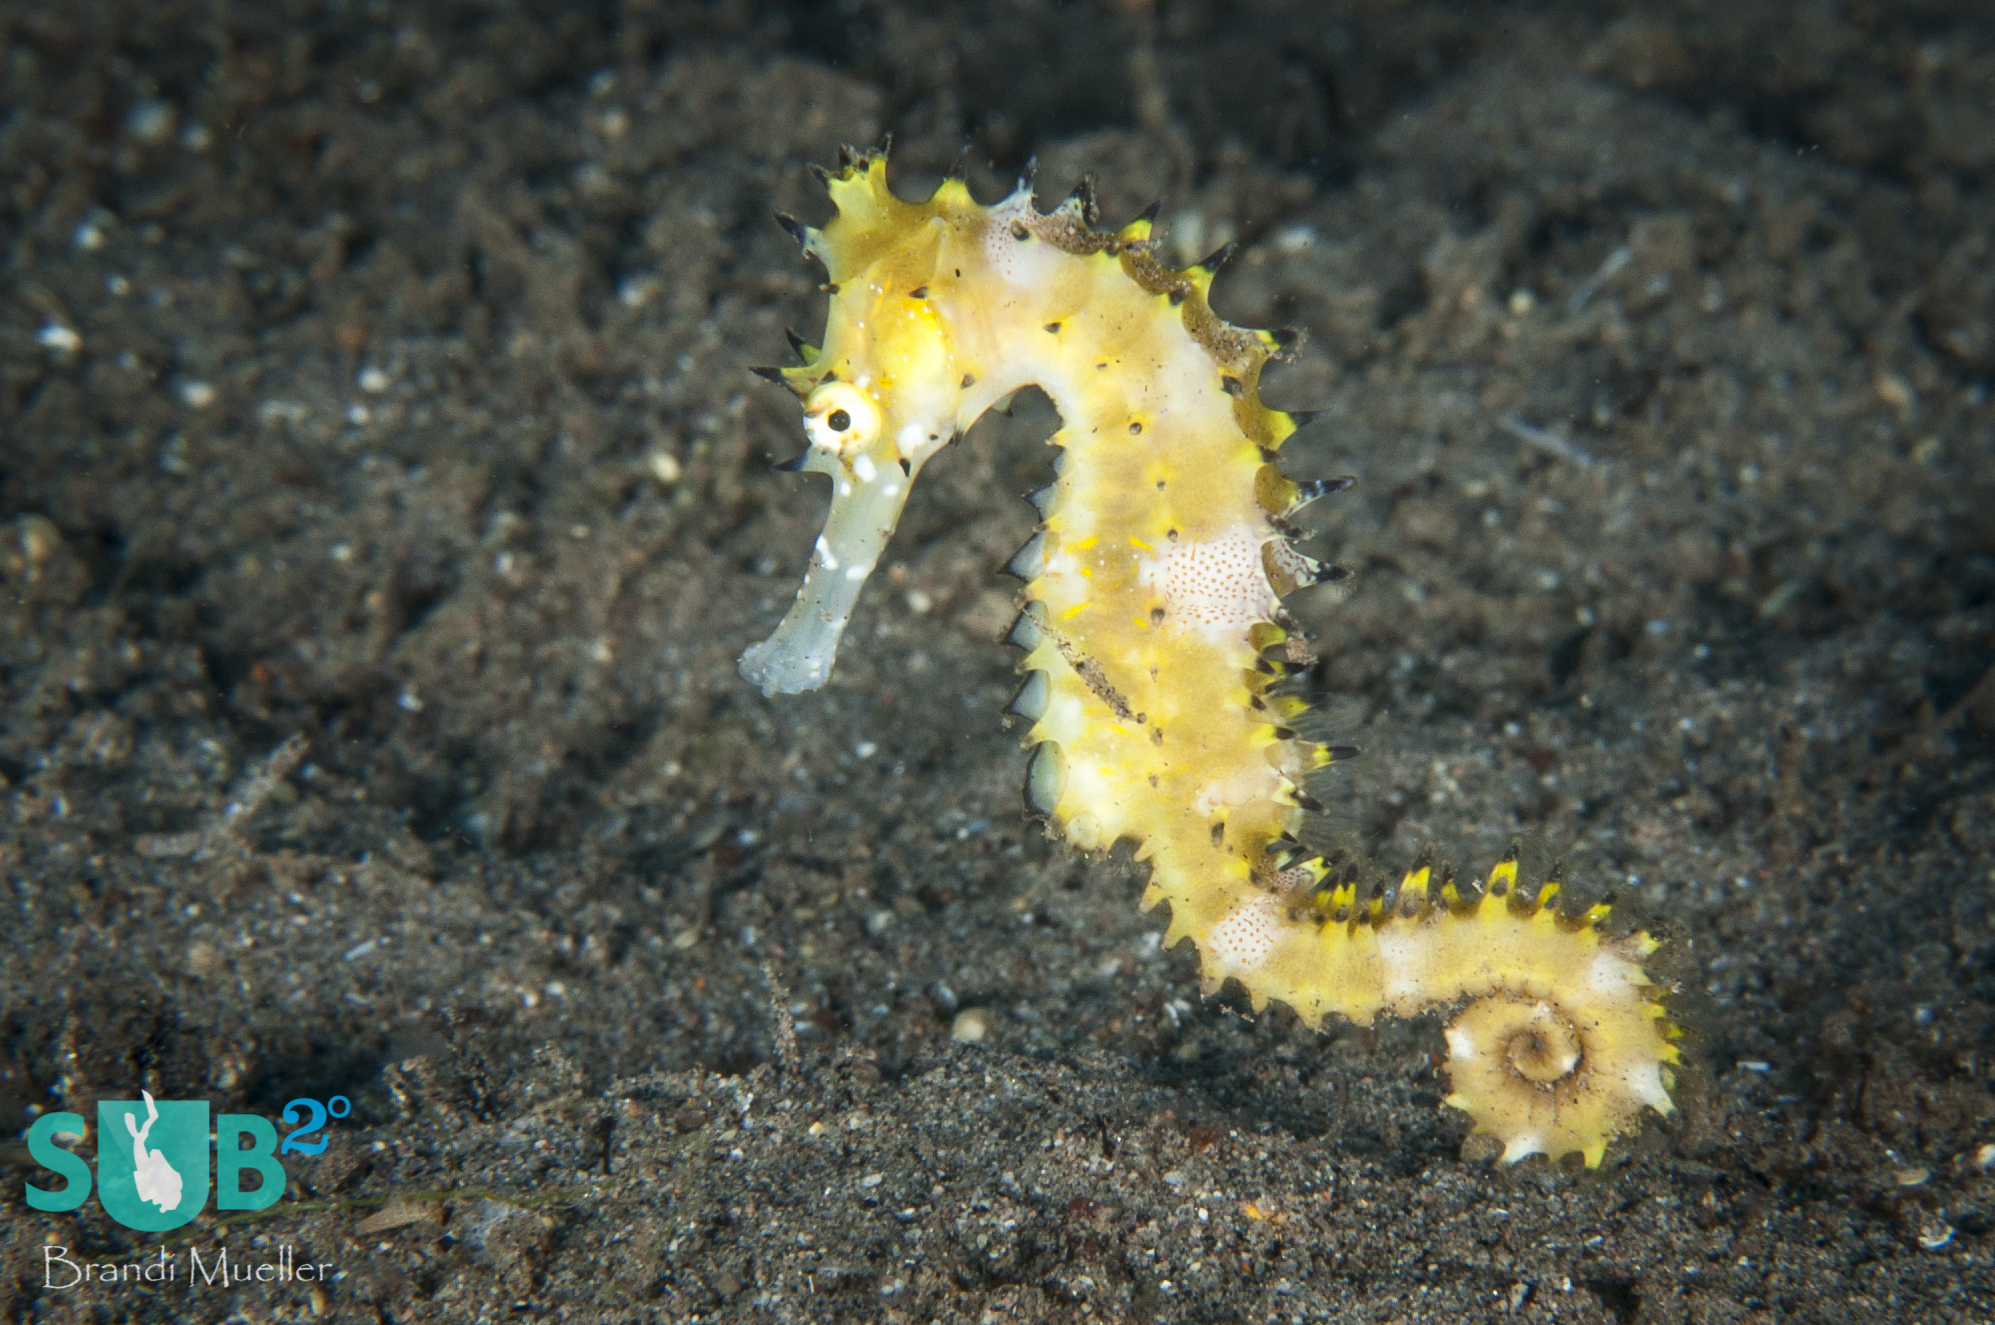 Thorny seahorses, such as this one, are often removed from the ocean in great quantities to be dried for souvenirs or to be used in traditional medicines. These practices could lead to endangering the species.